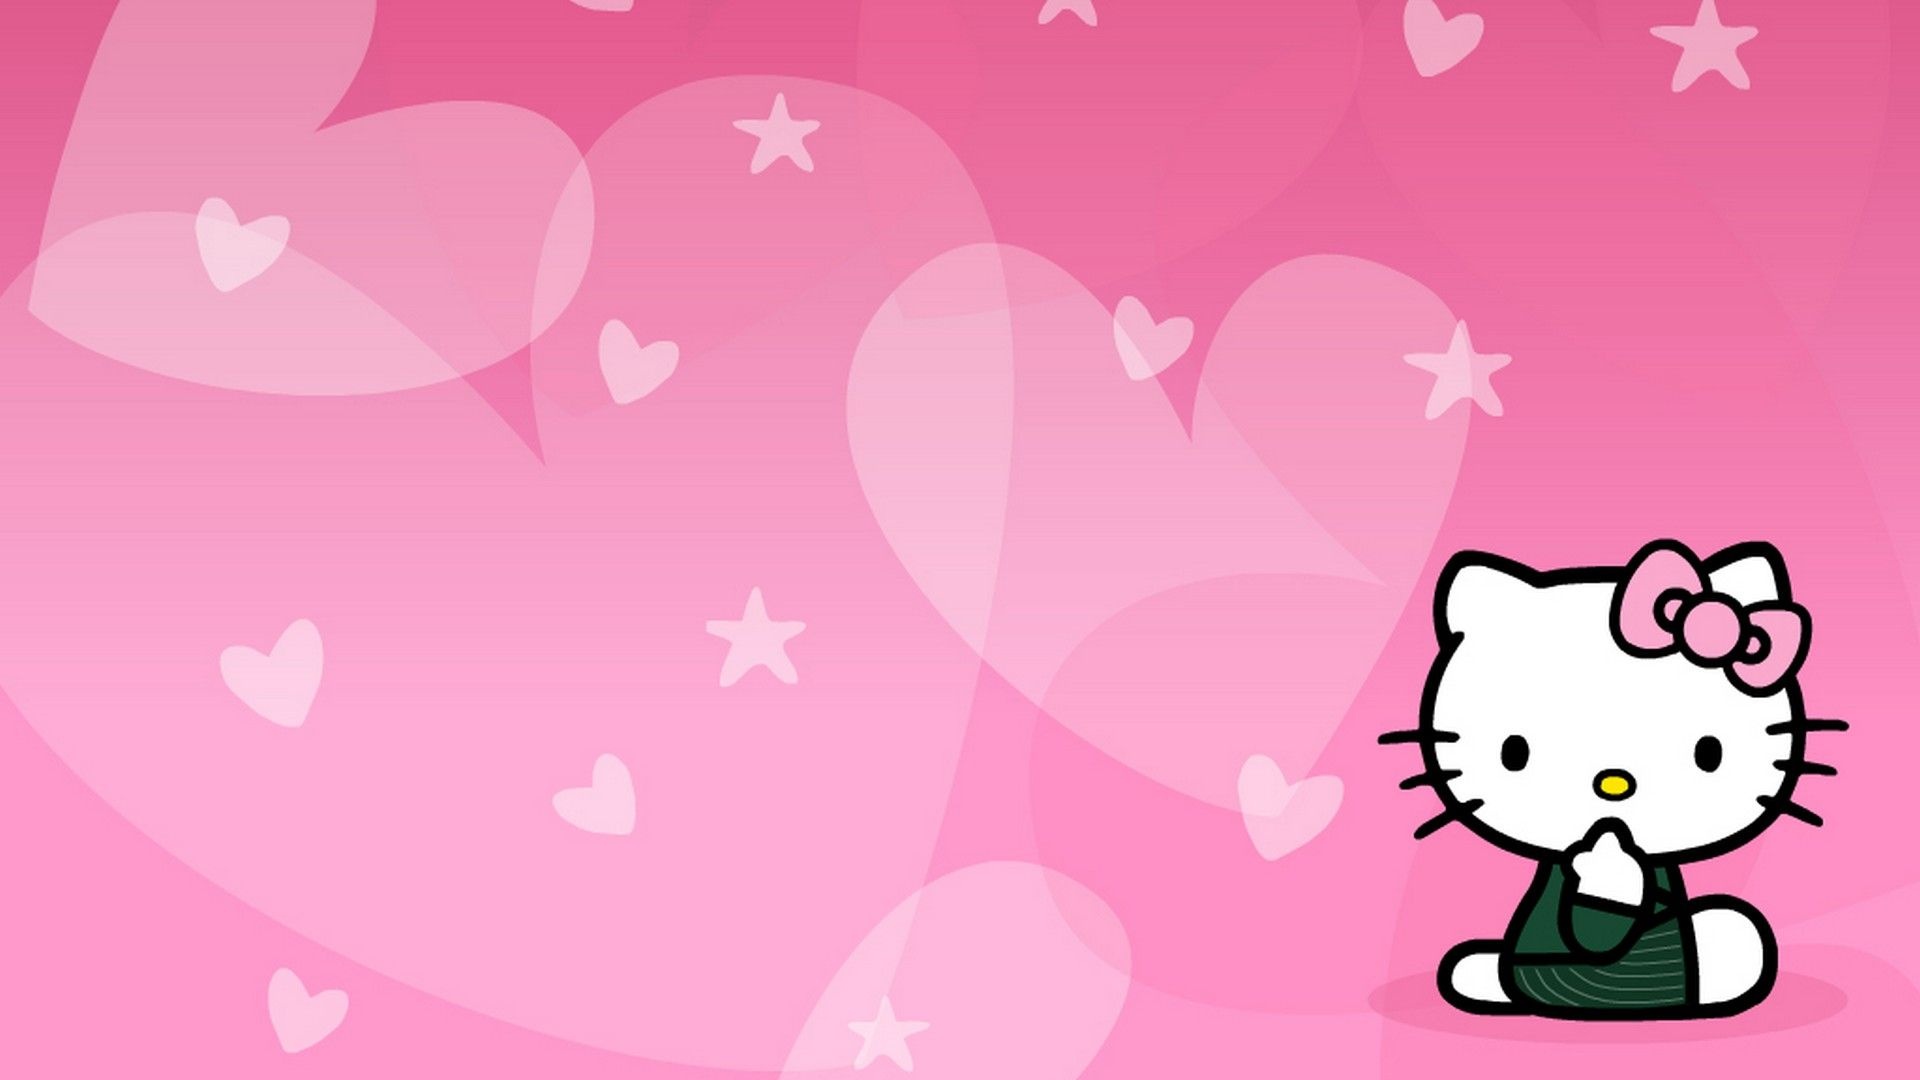 Hello Kitty: A gijinka, an anthropomorphism or personification of a Japanese Bobtail cat. 1920x1080 Full HD Wallpaper.